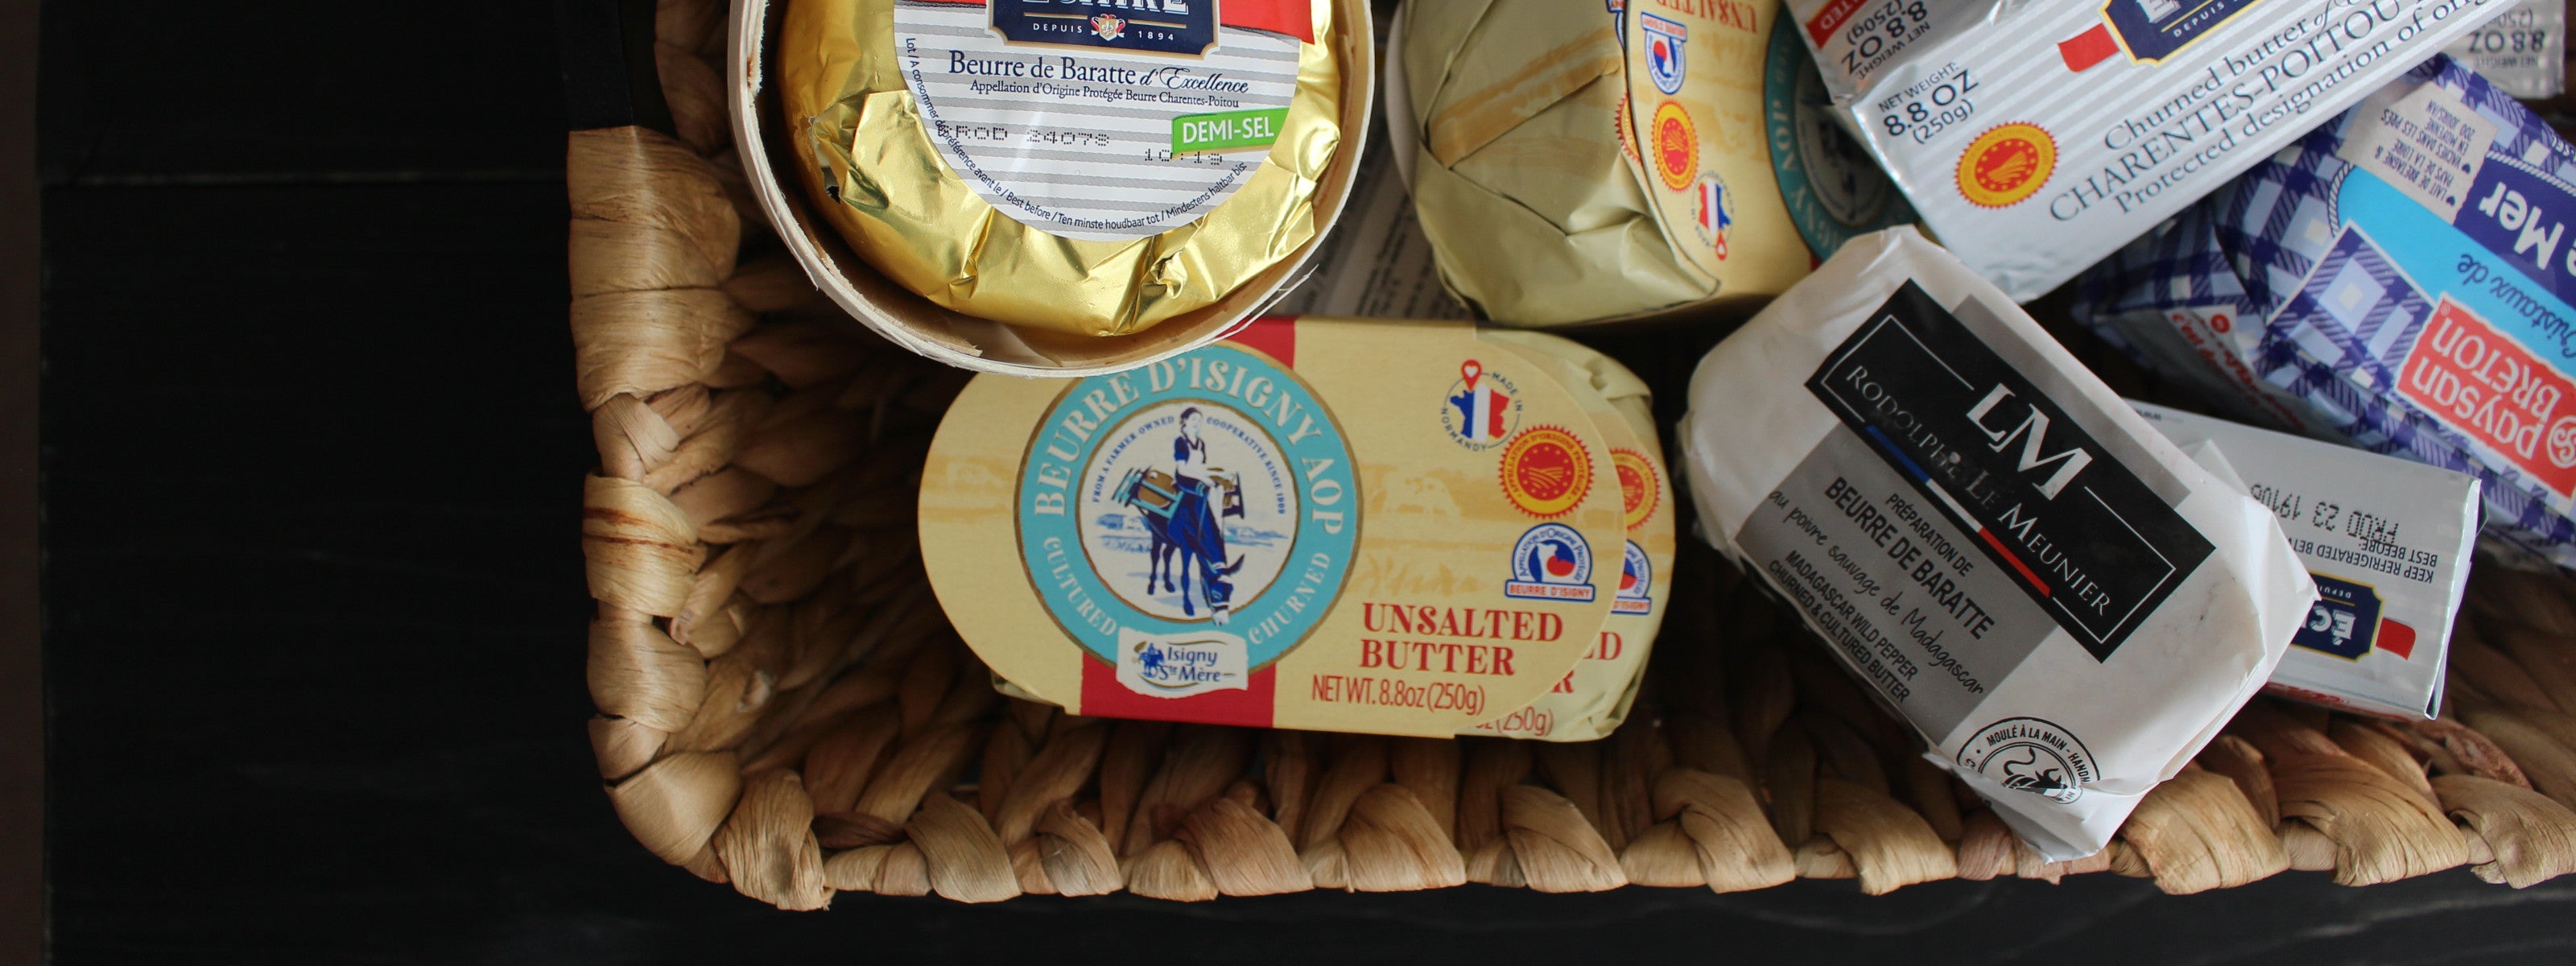 French butter - Cured and Cultivated